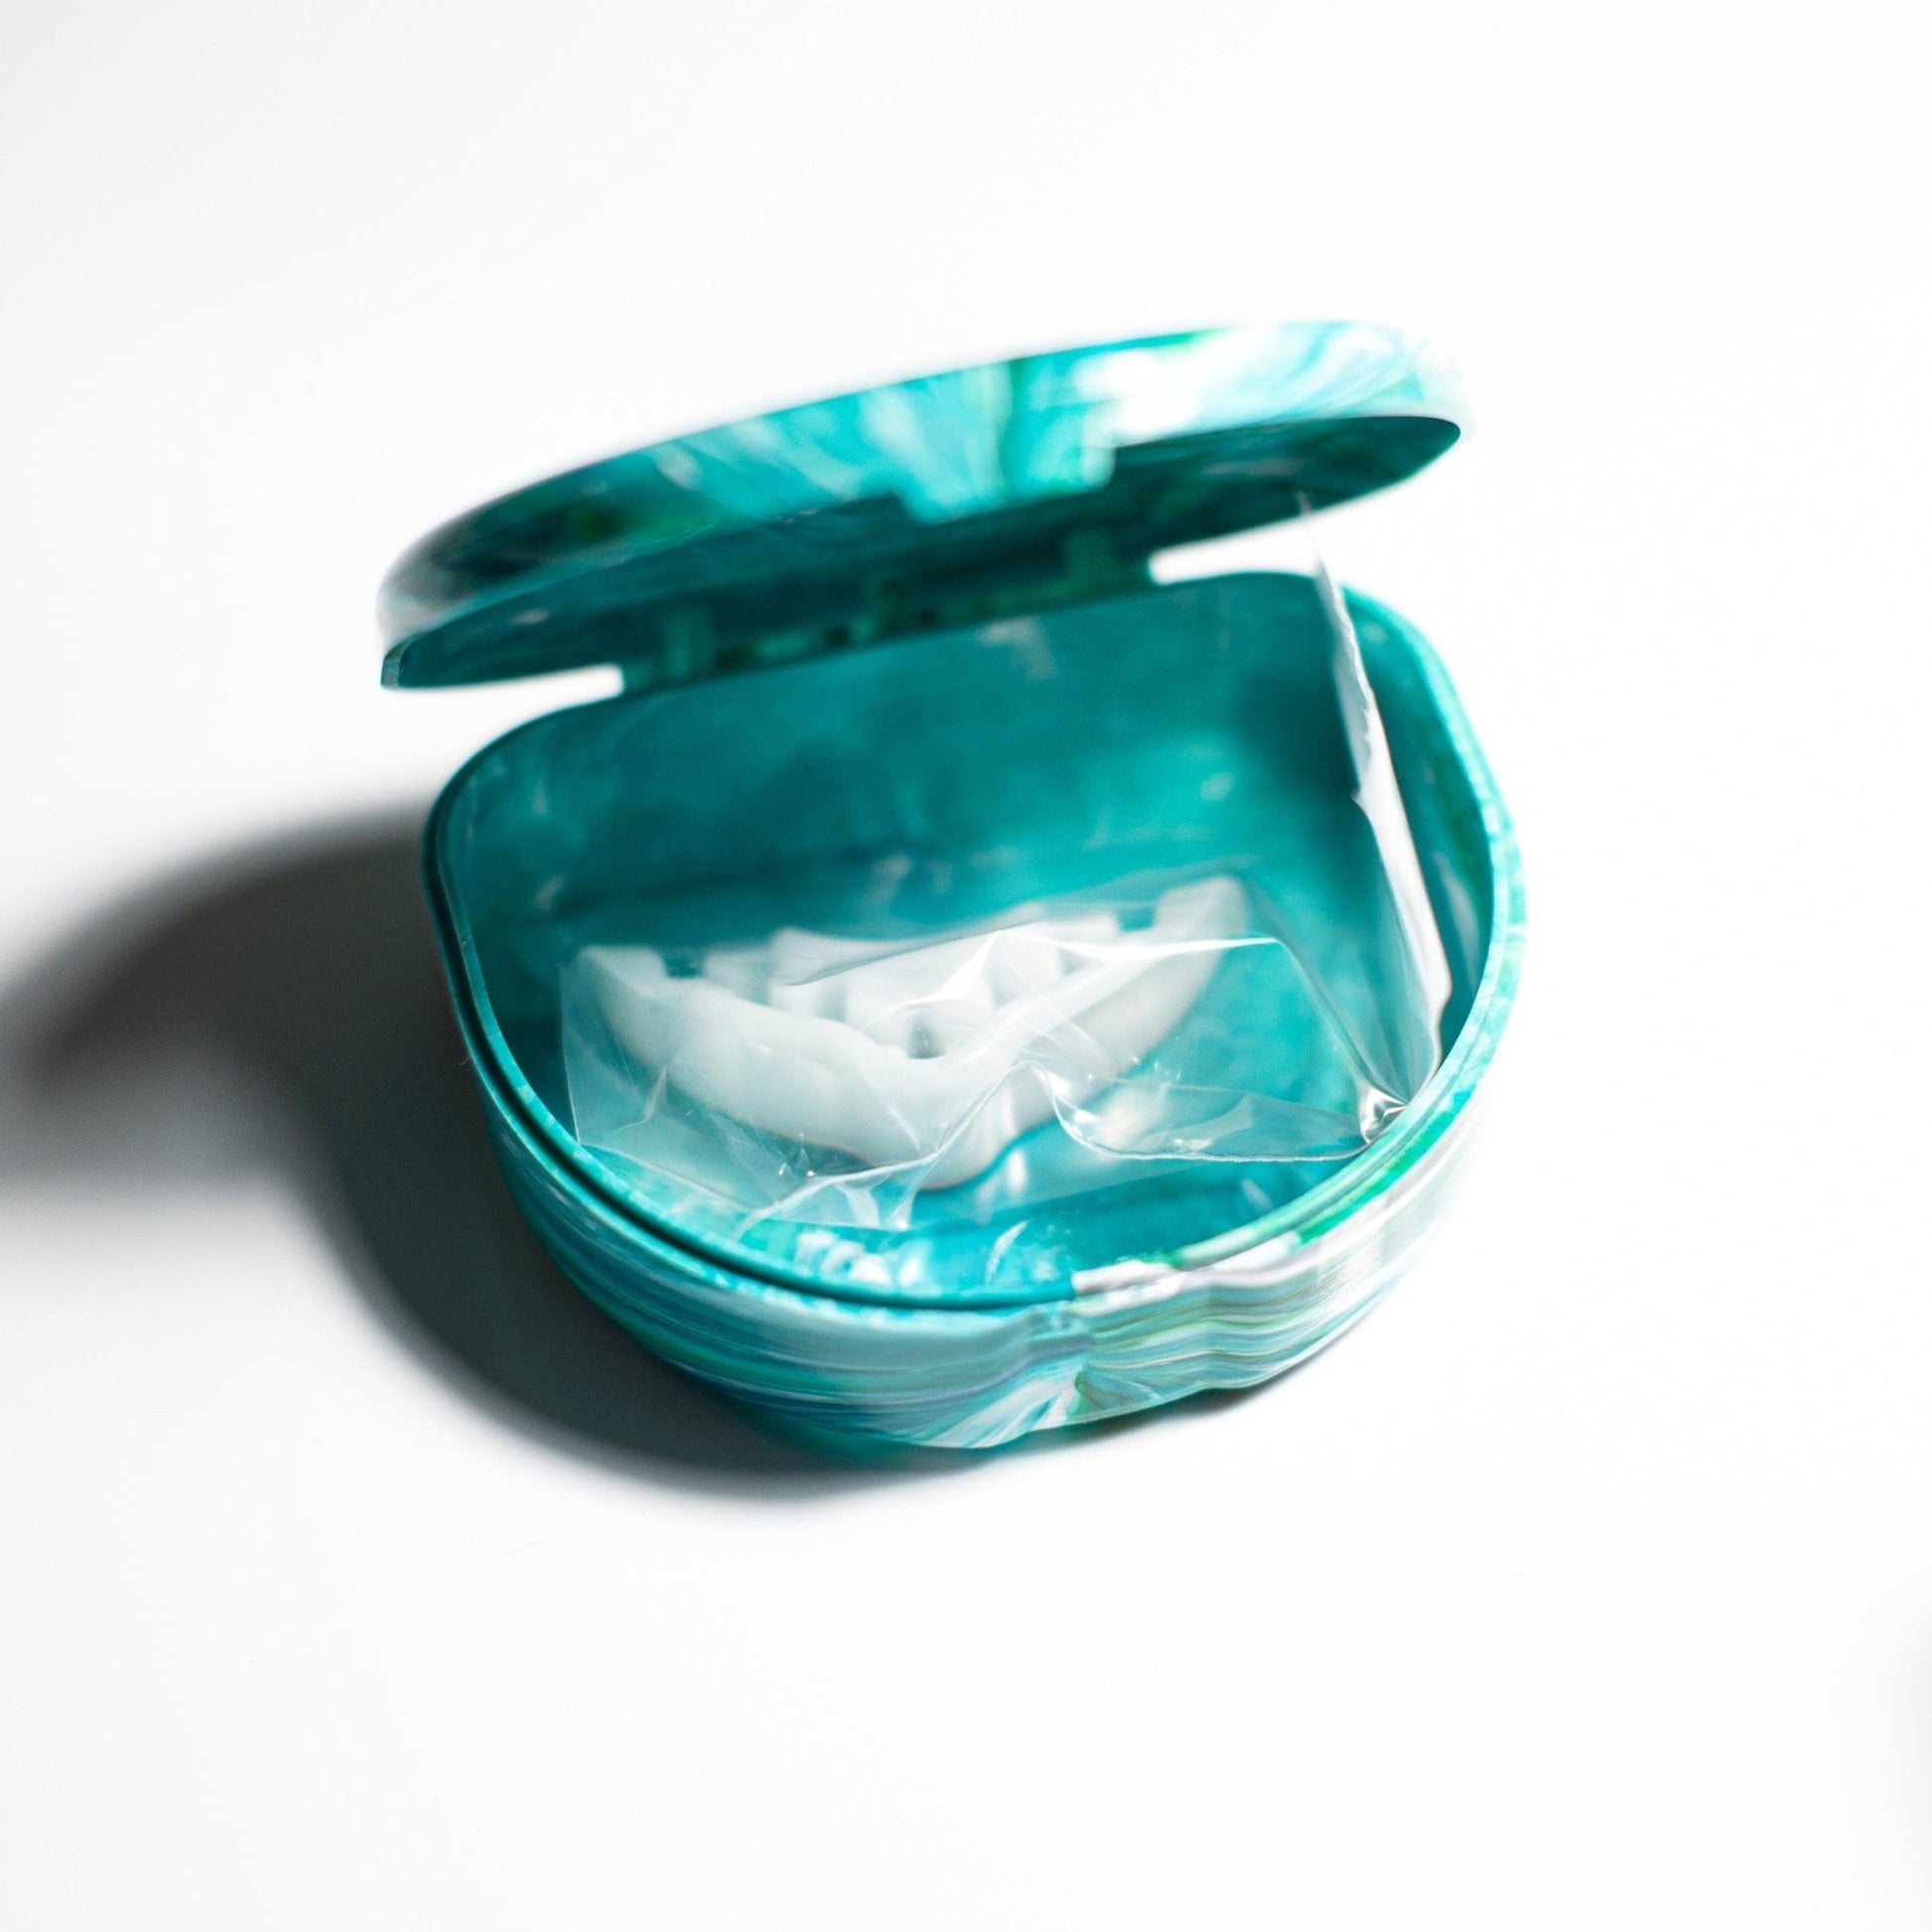 Teeth Guard Case In Turquoise Color - FastSplint